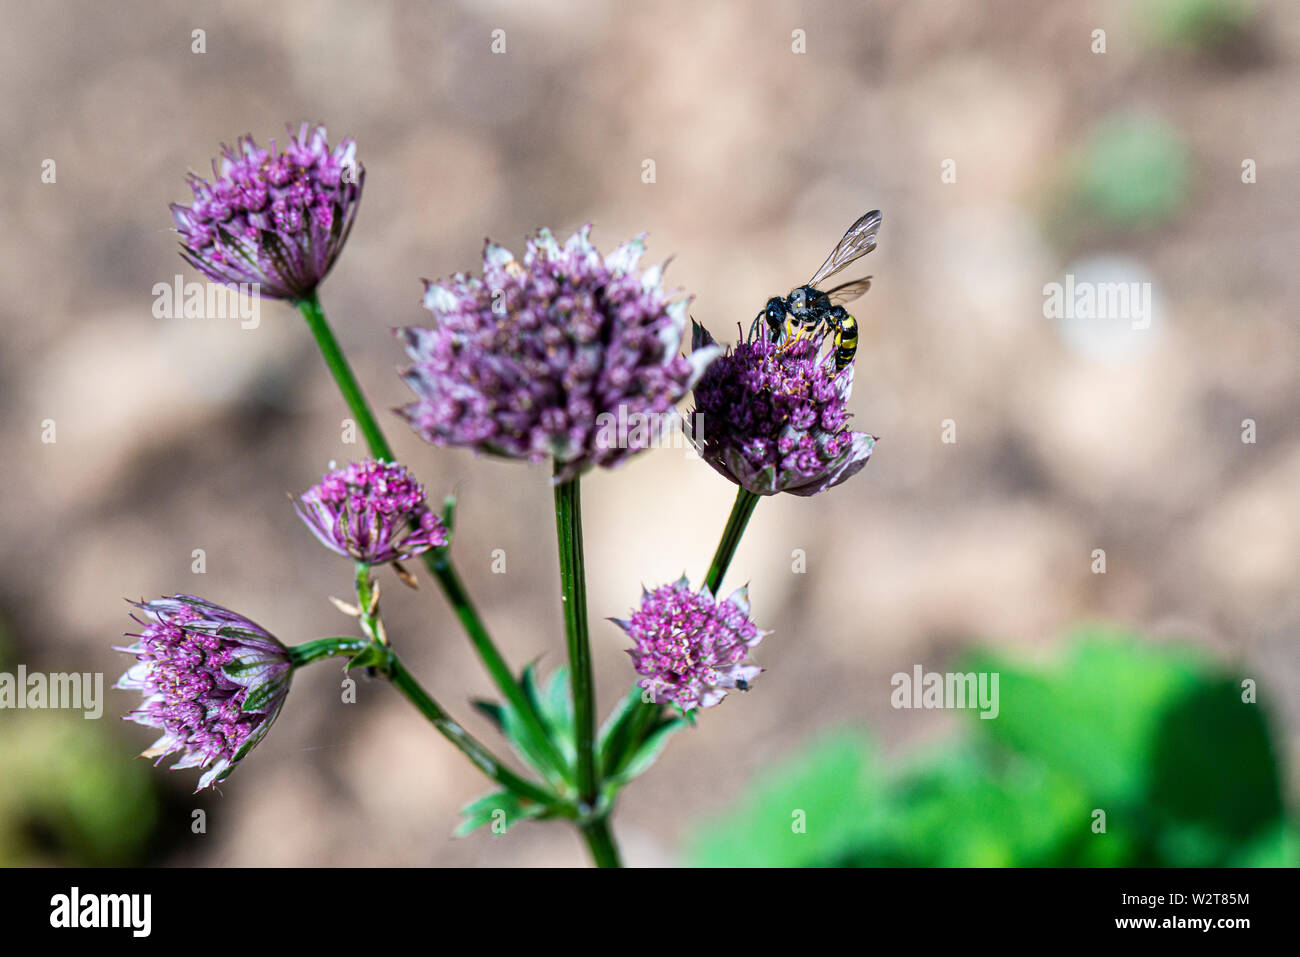 A wasp on the flower of astrantia Stock Photo